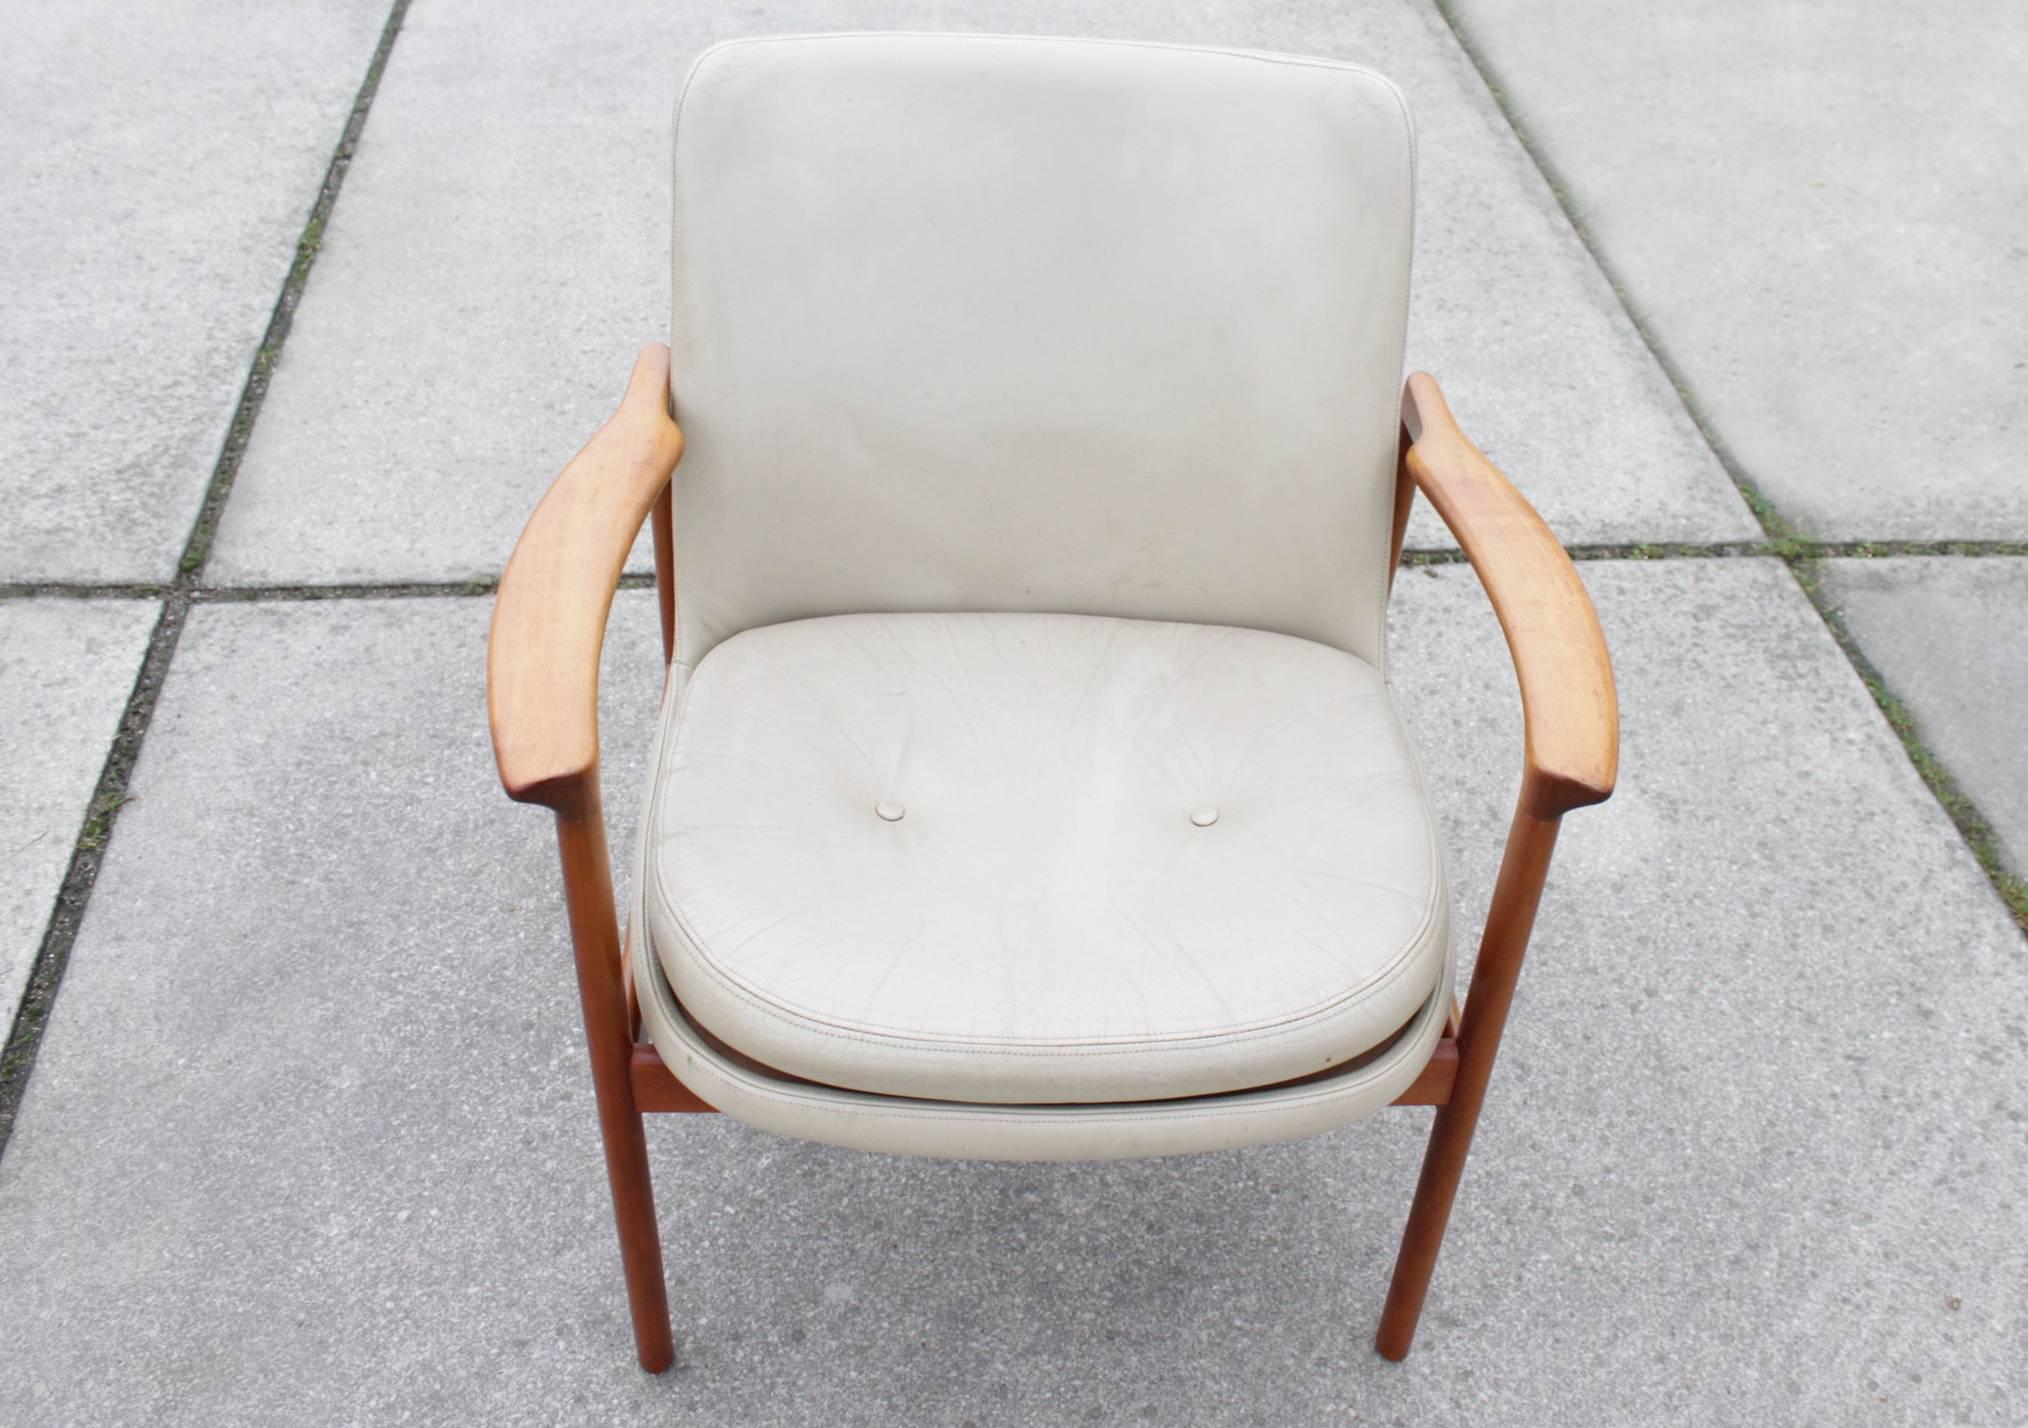 This very beautiful piece is made of rosewood and has original off-white leather seating. The leather has used patina. This classic Scandinavian piece is very easy to adjust to any interior. Conference chair has the characteristics of the iconic